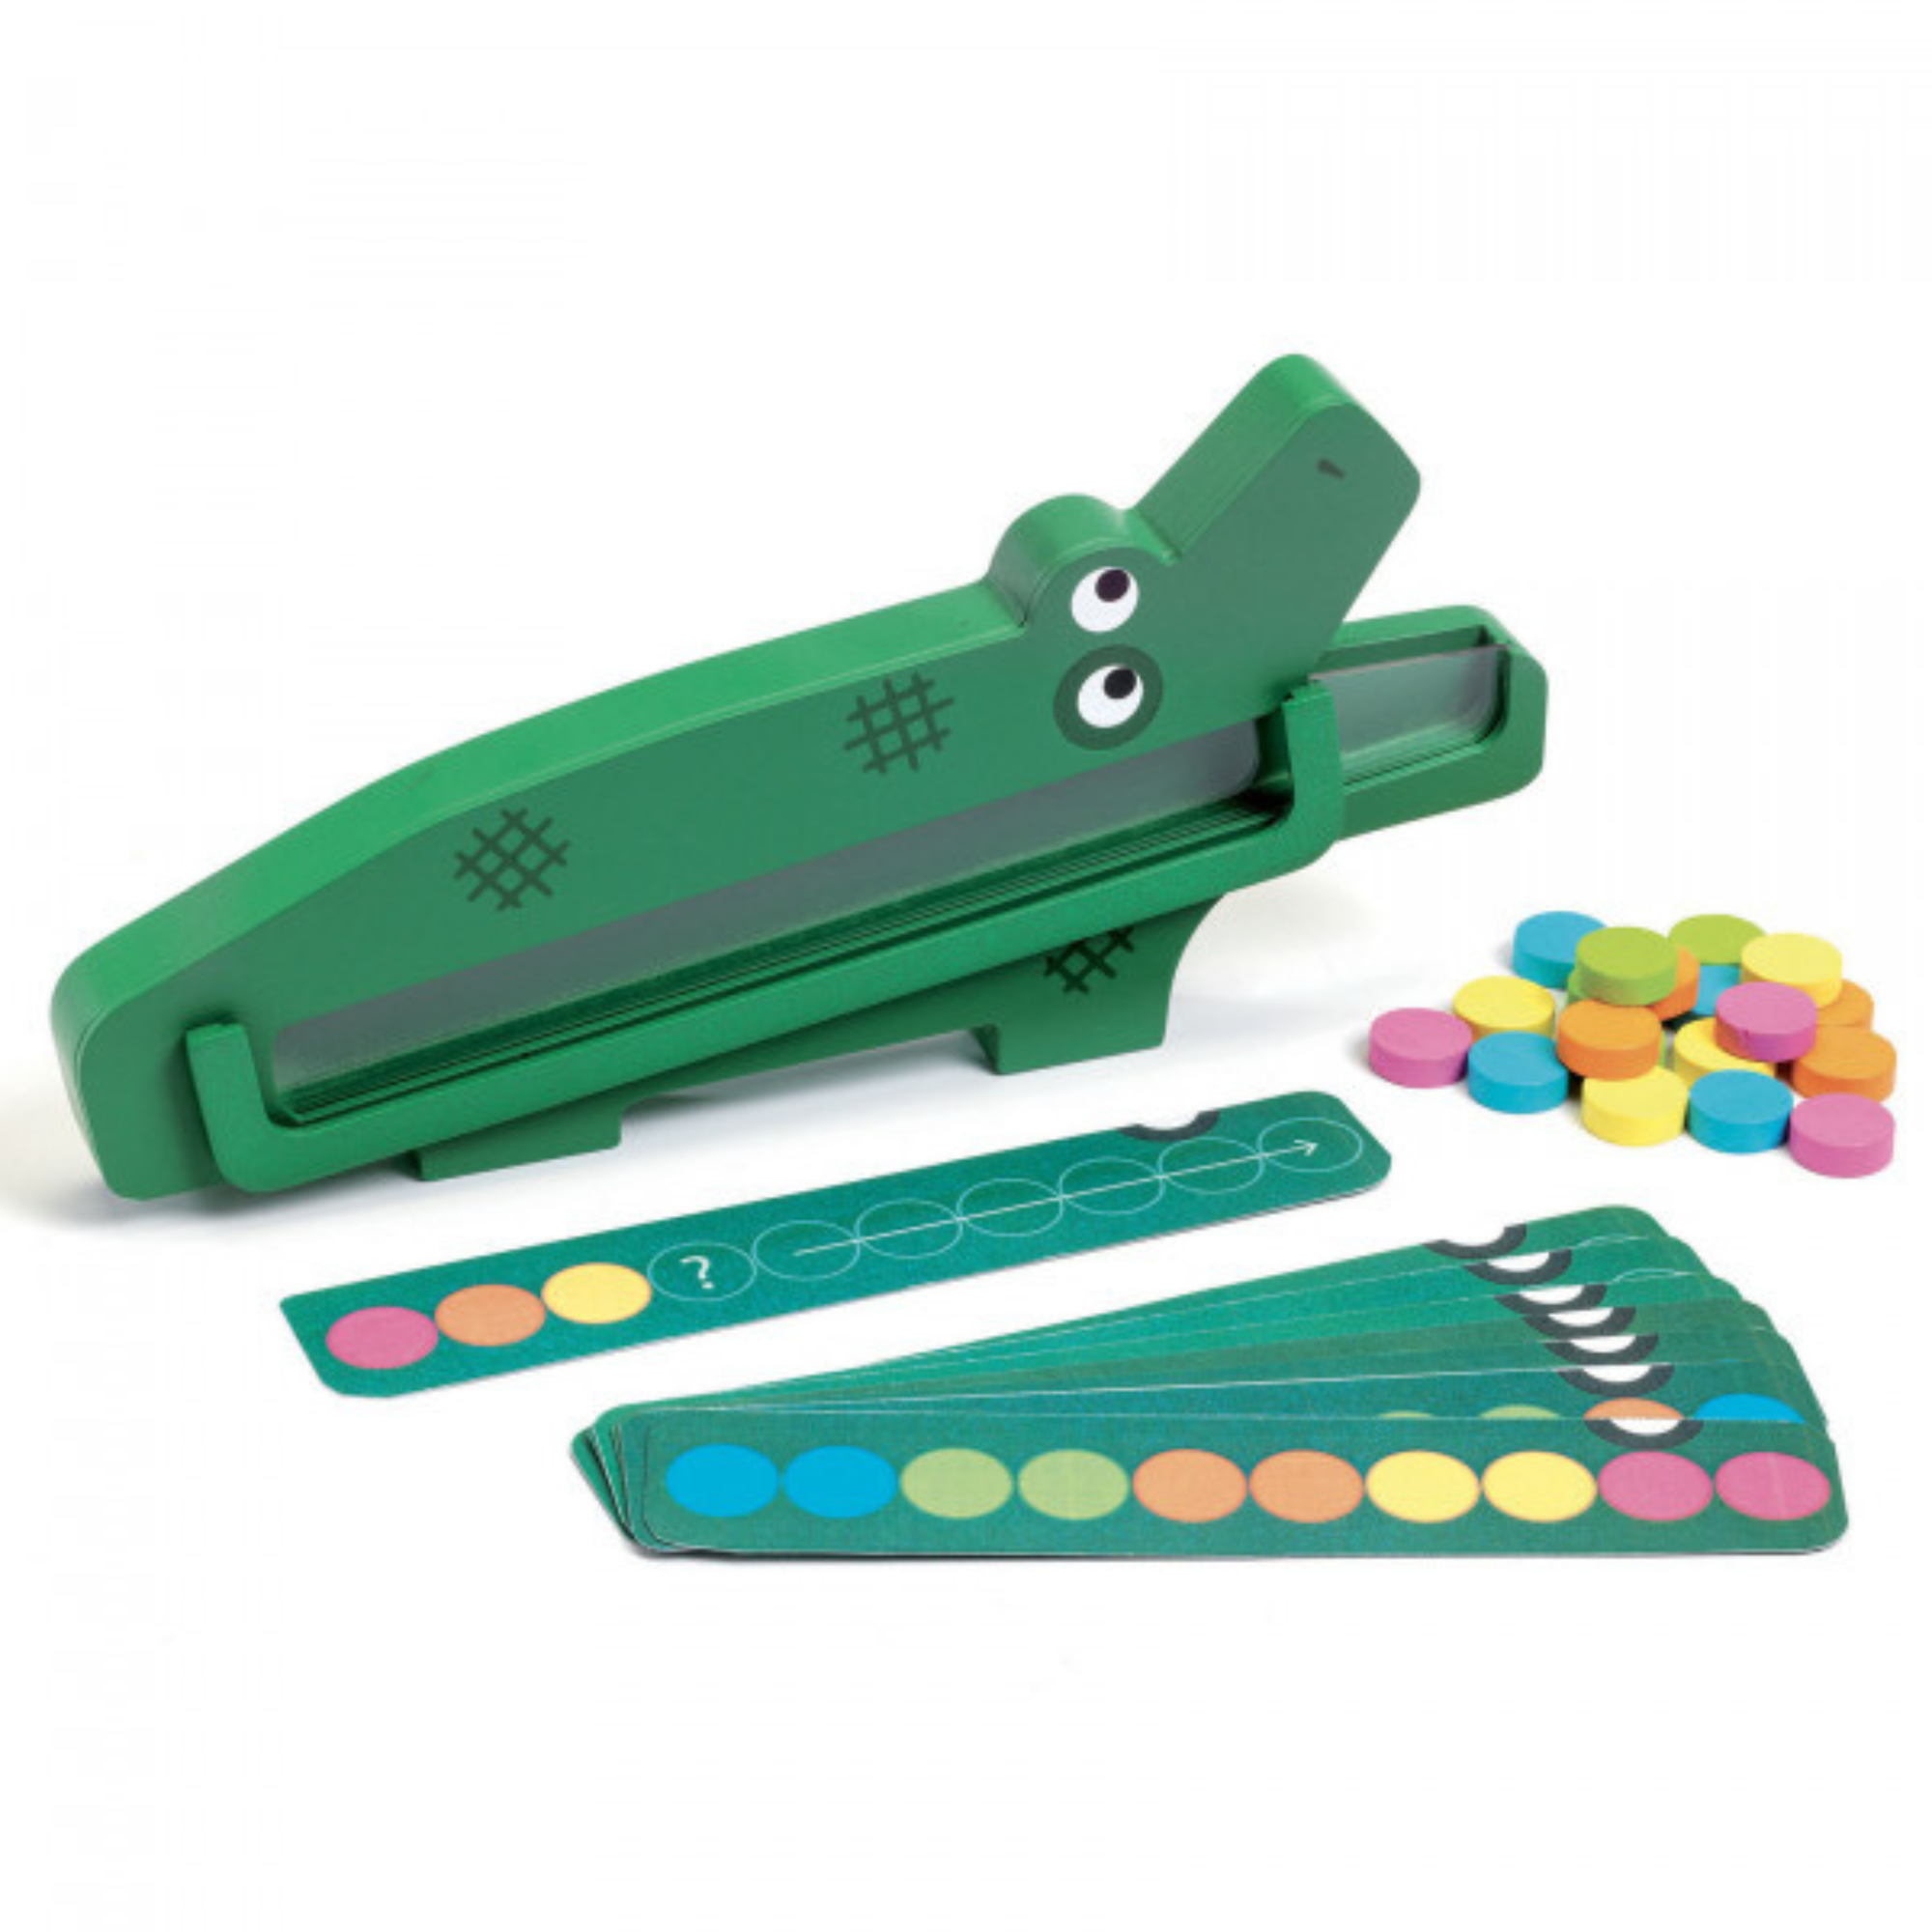 Educational wooden game - Crococroc